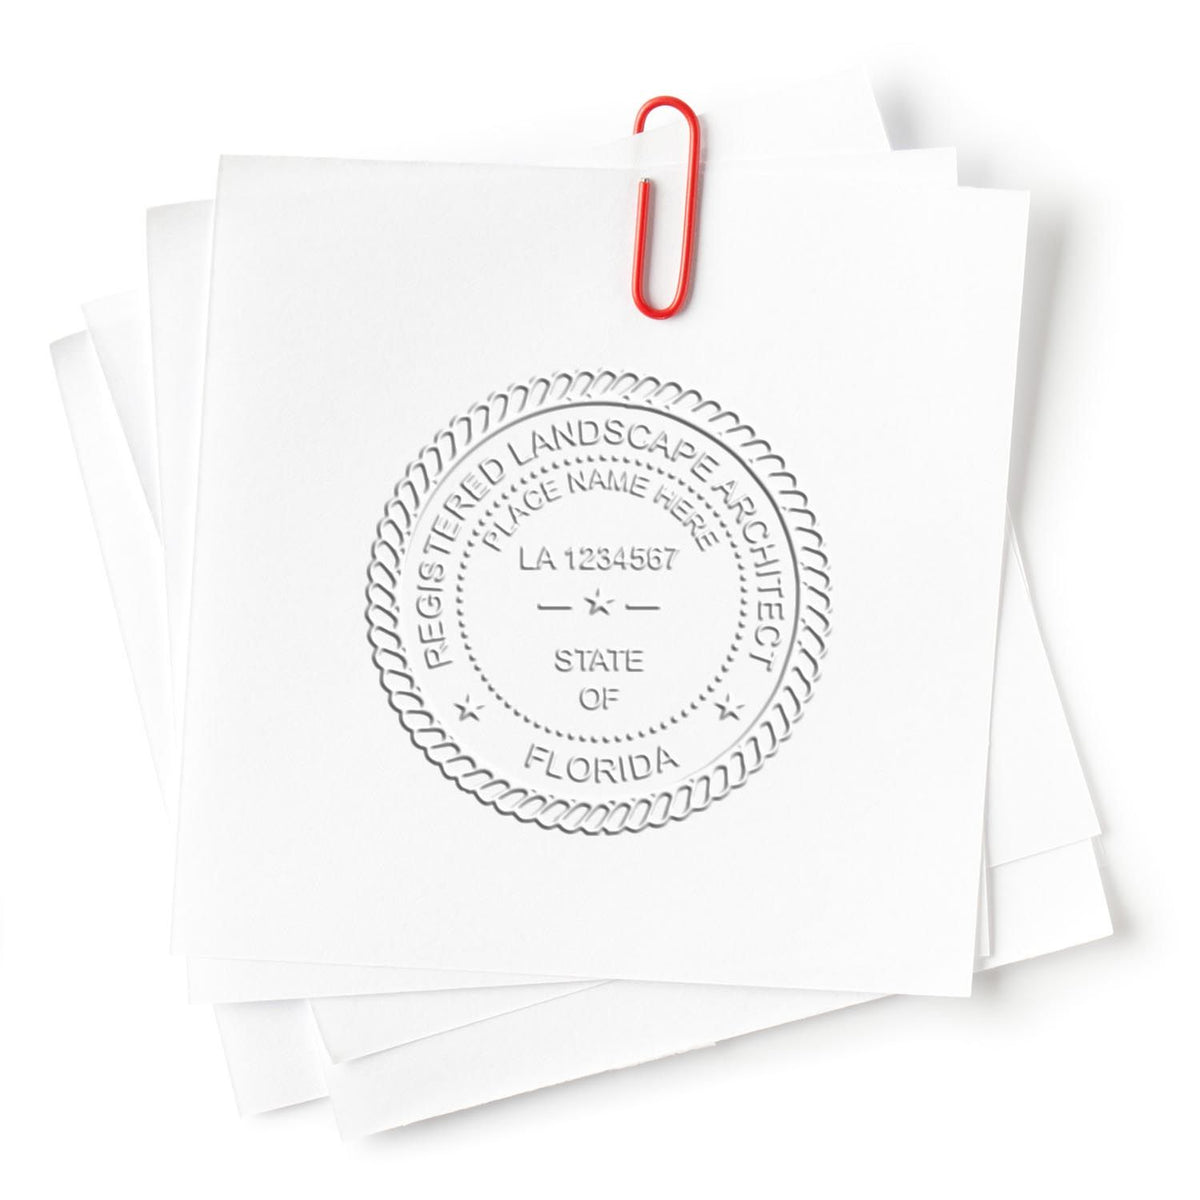 An alternative view of the Hybrid Florida Landscape Architect Seal stamped on a sheet of paper showing the image in use